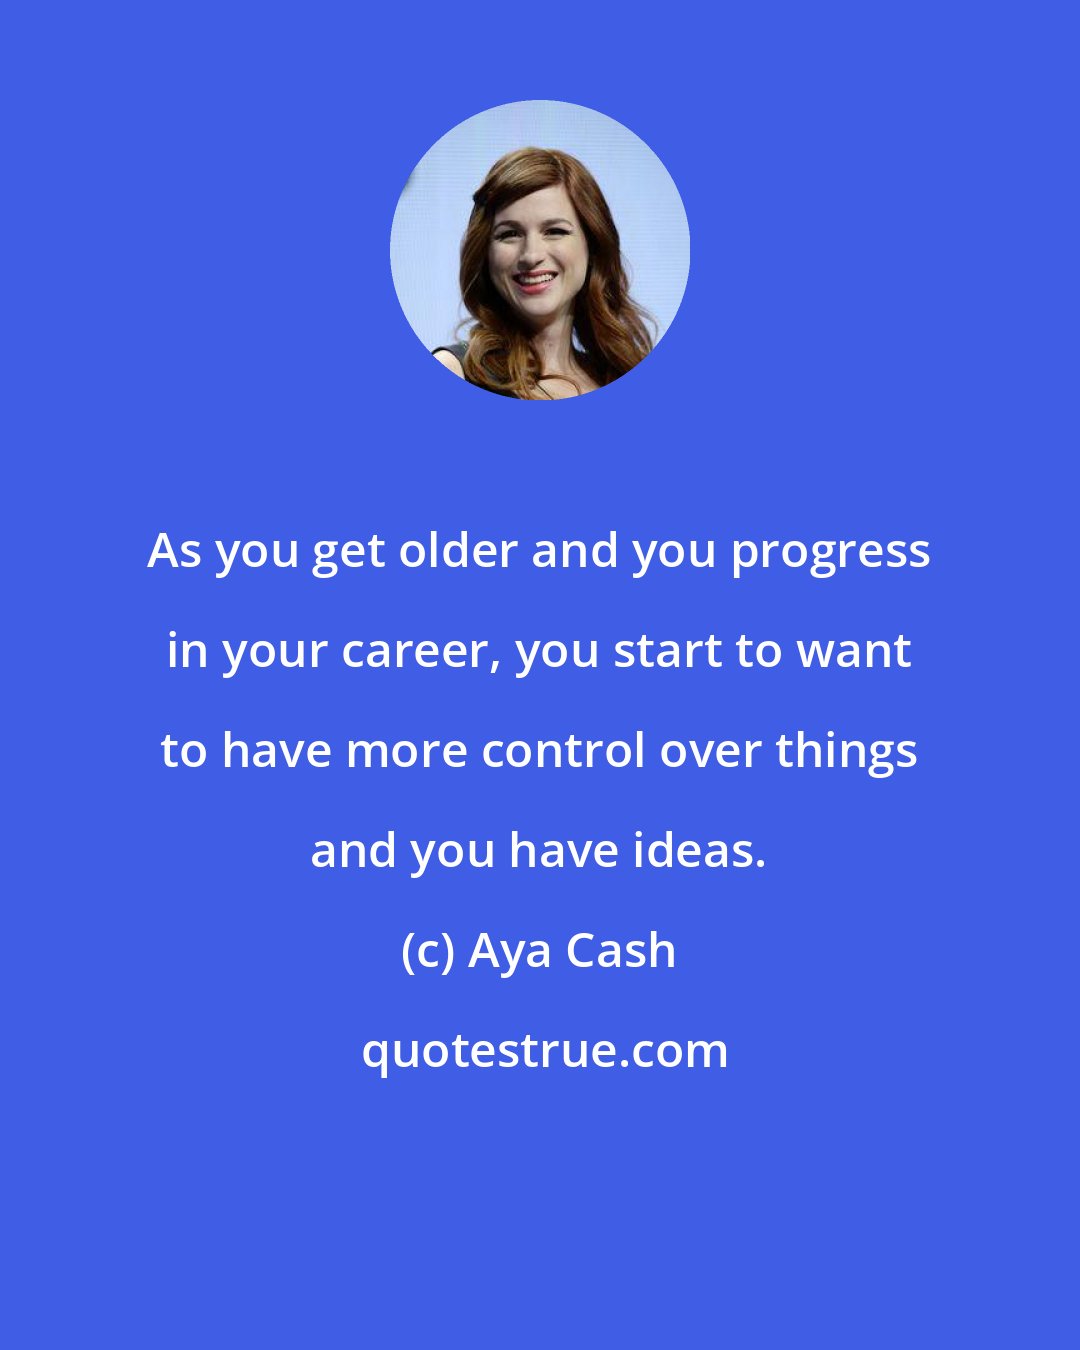 Aya Cash: As you get older and you progress in your career, you start to want to have more control over things and you have ideas.